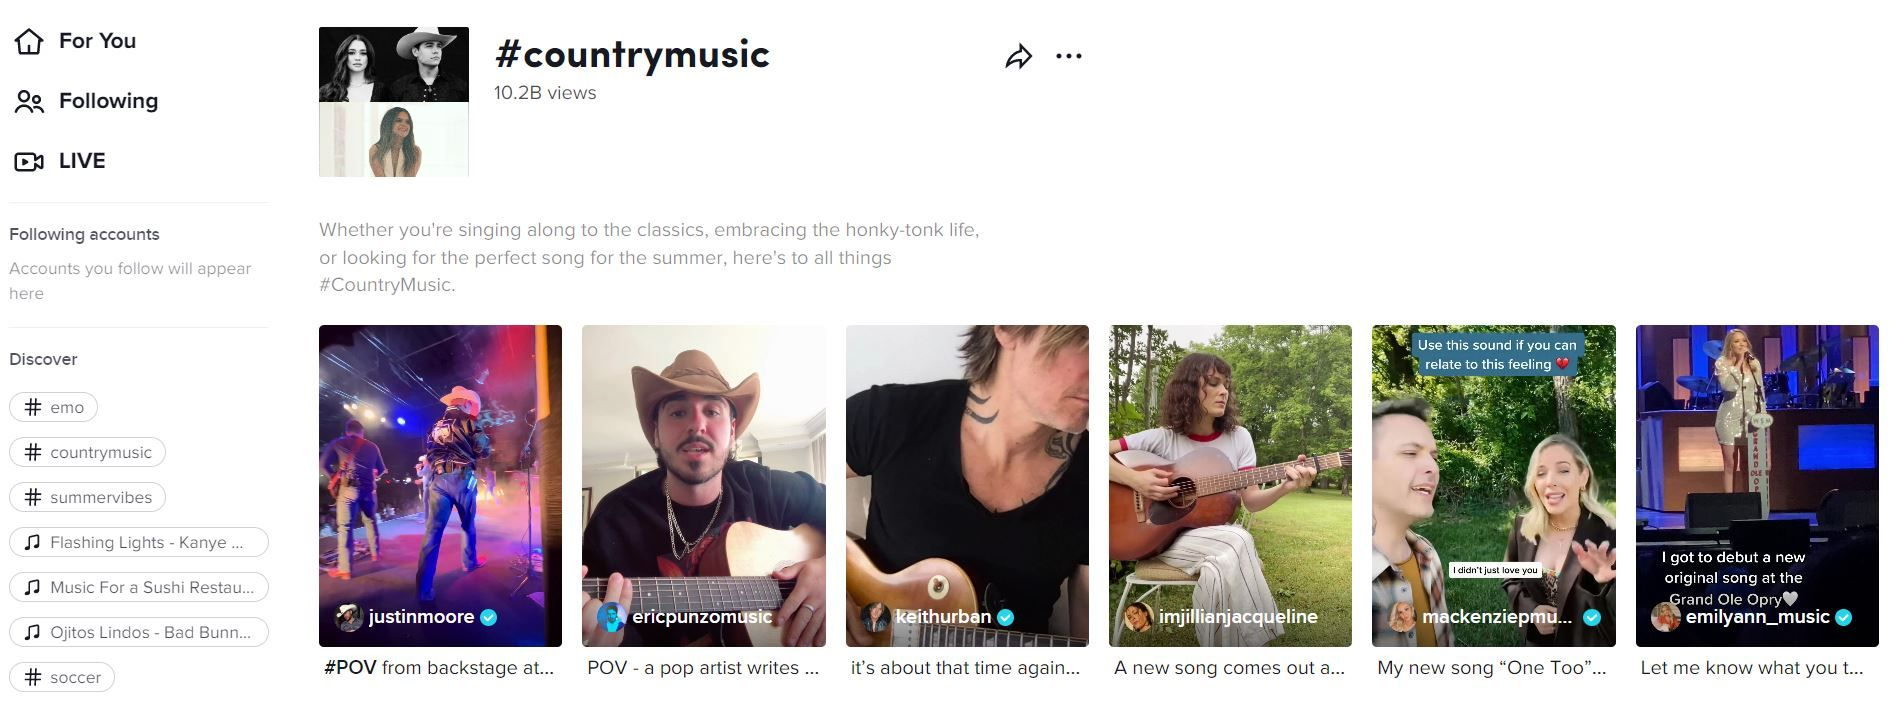 The "Discover" section shows you daily trending hashtags on TikTok